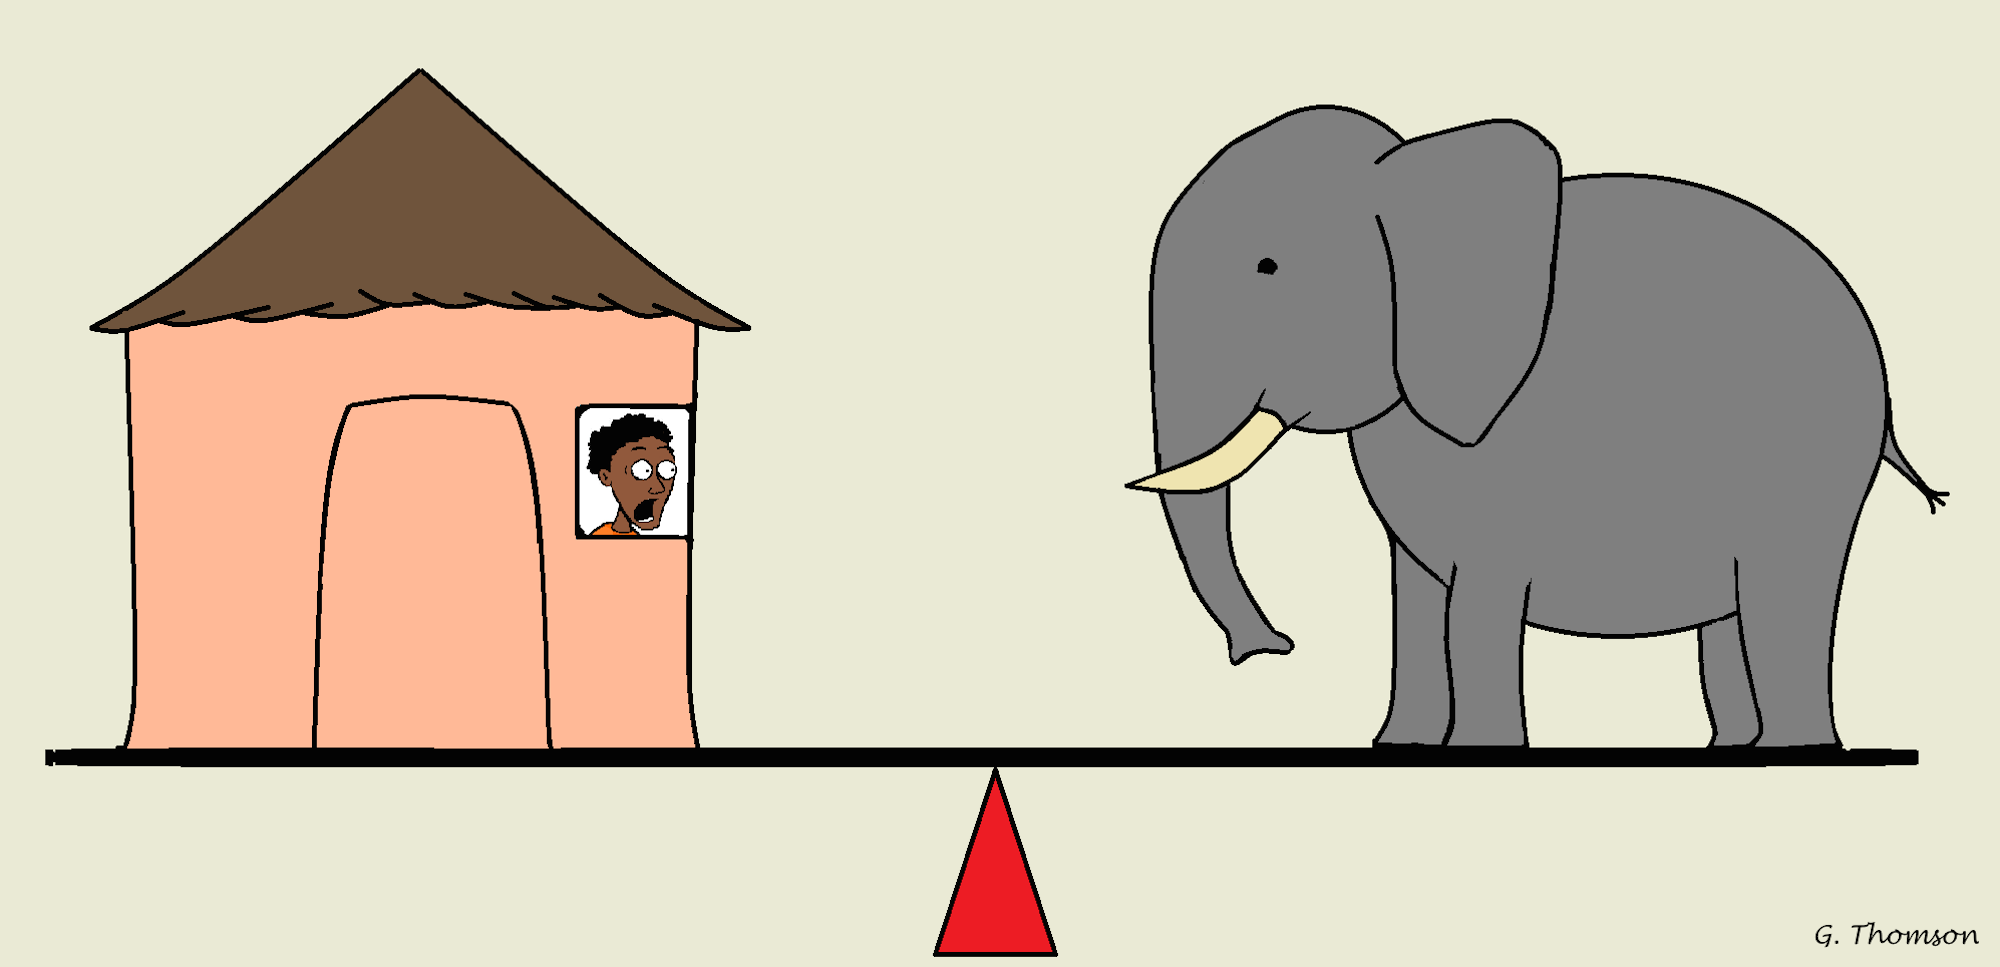 A cartoon depicting an elephant and a terrified villager balancing on a seesaw.